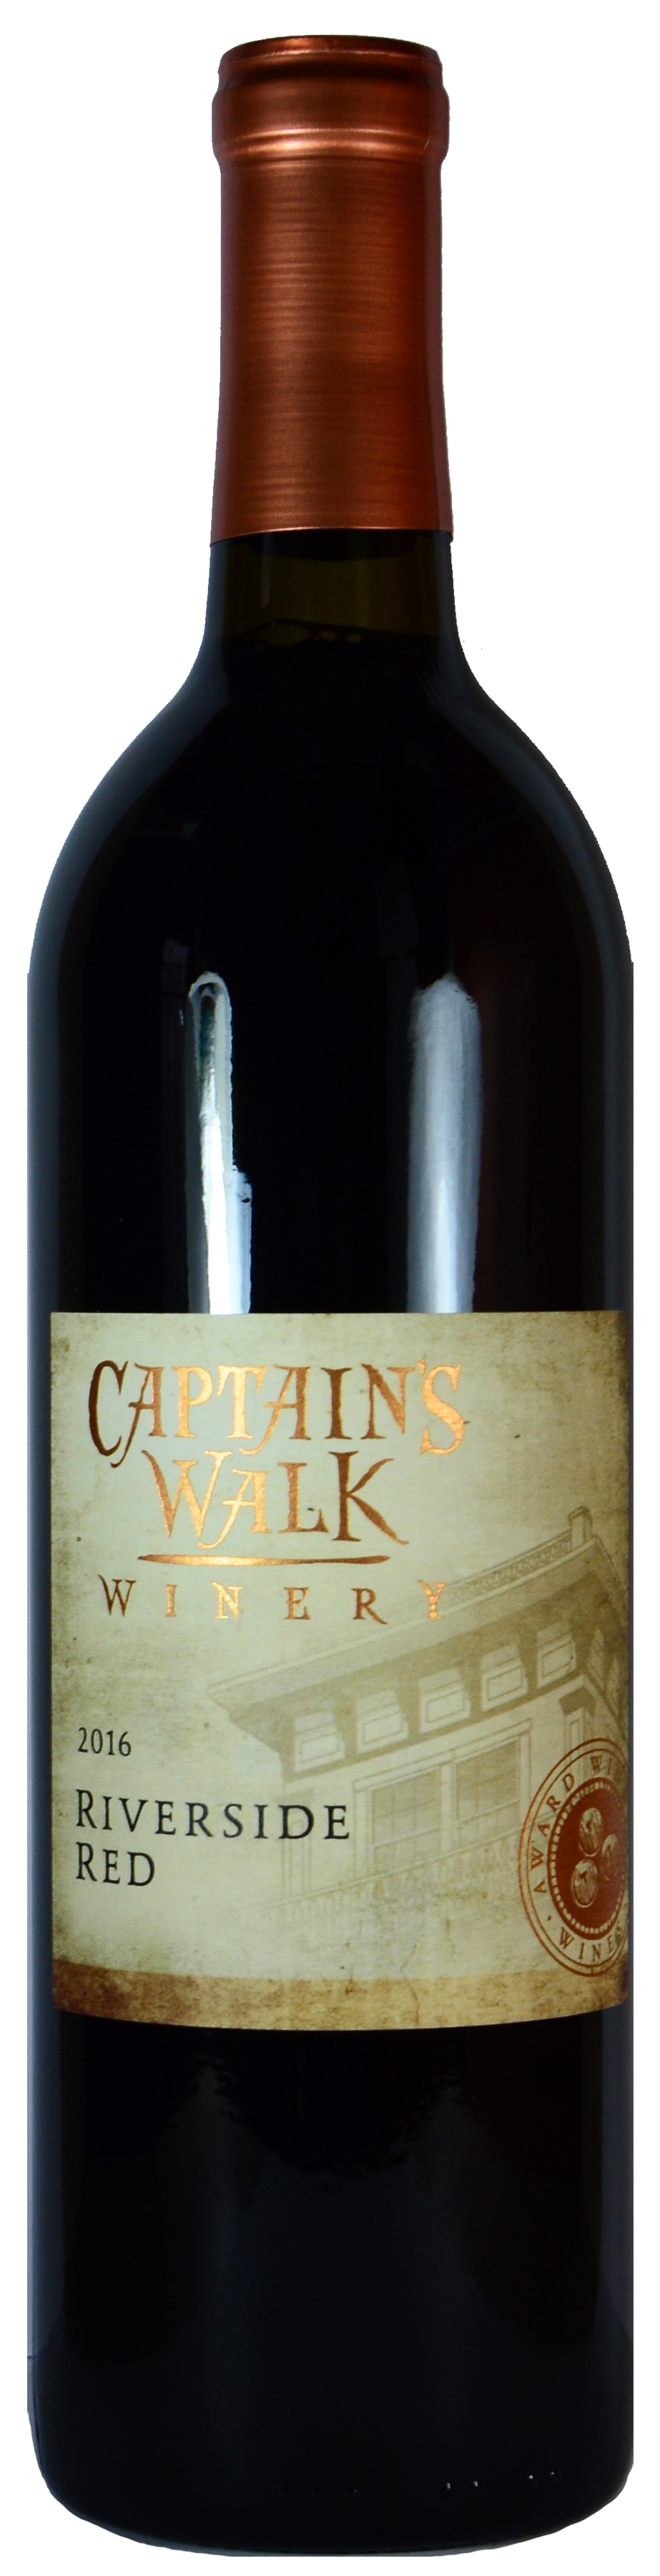 Captain's Walk Riverside Red Product Photo